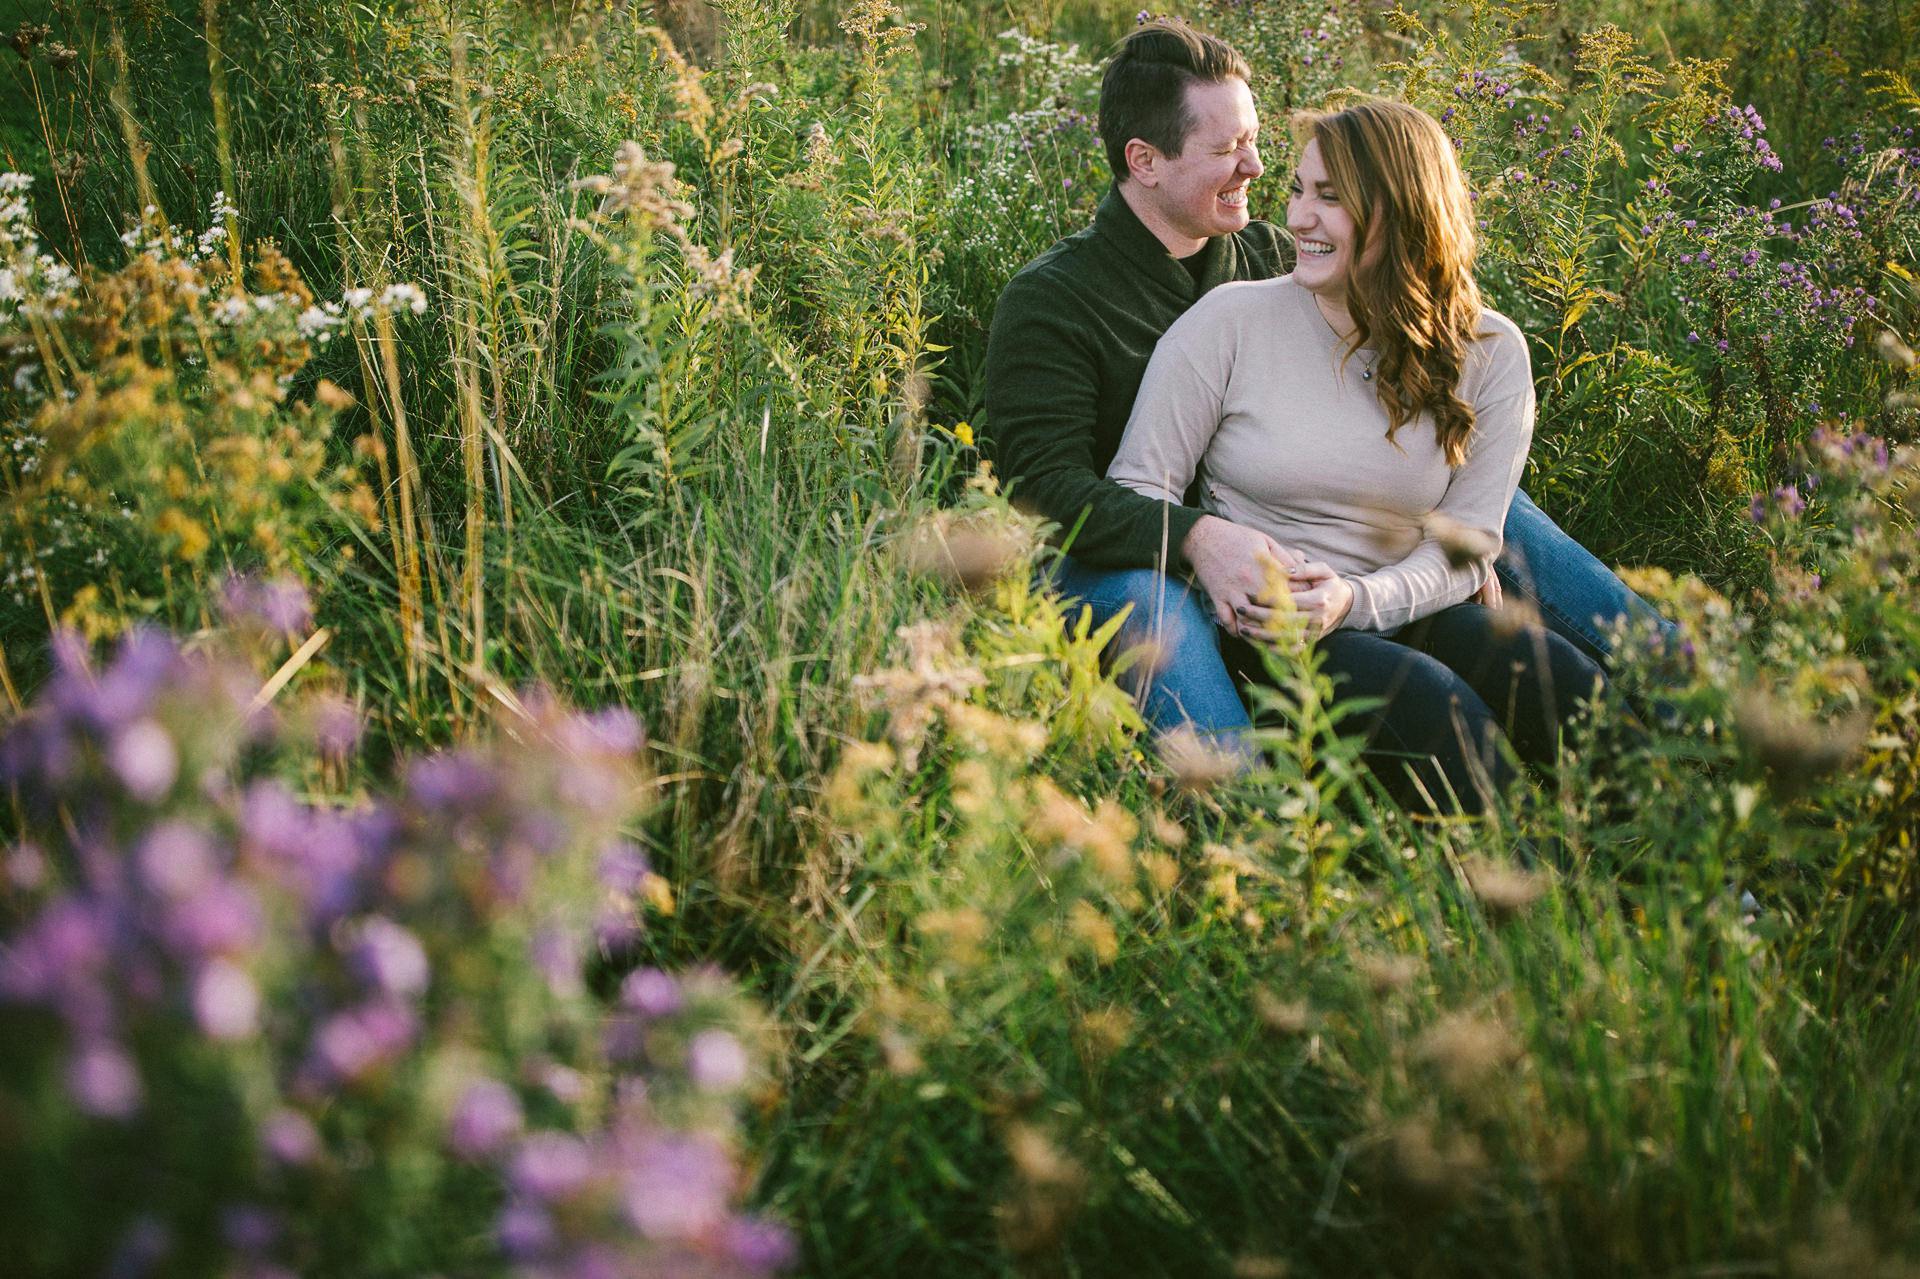 Cleveland Fall Engagement Session at Pattersons Fruit Farm 24.jpg